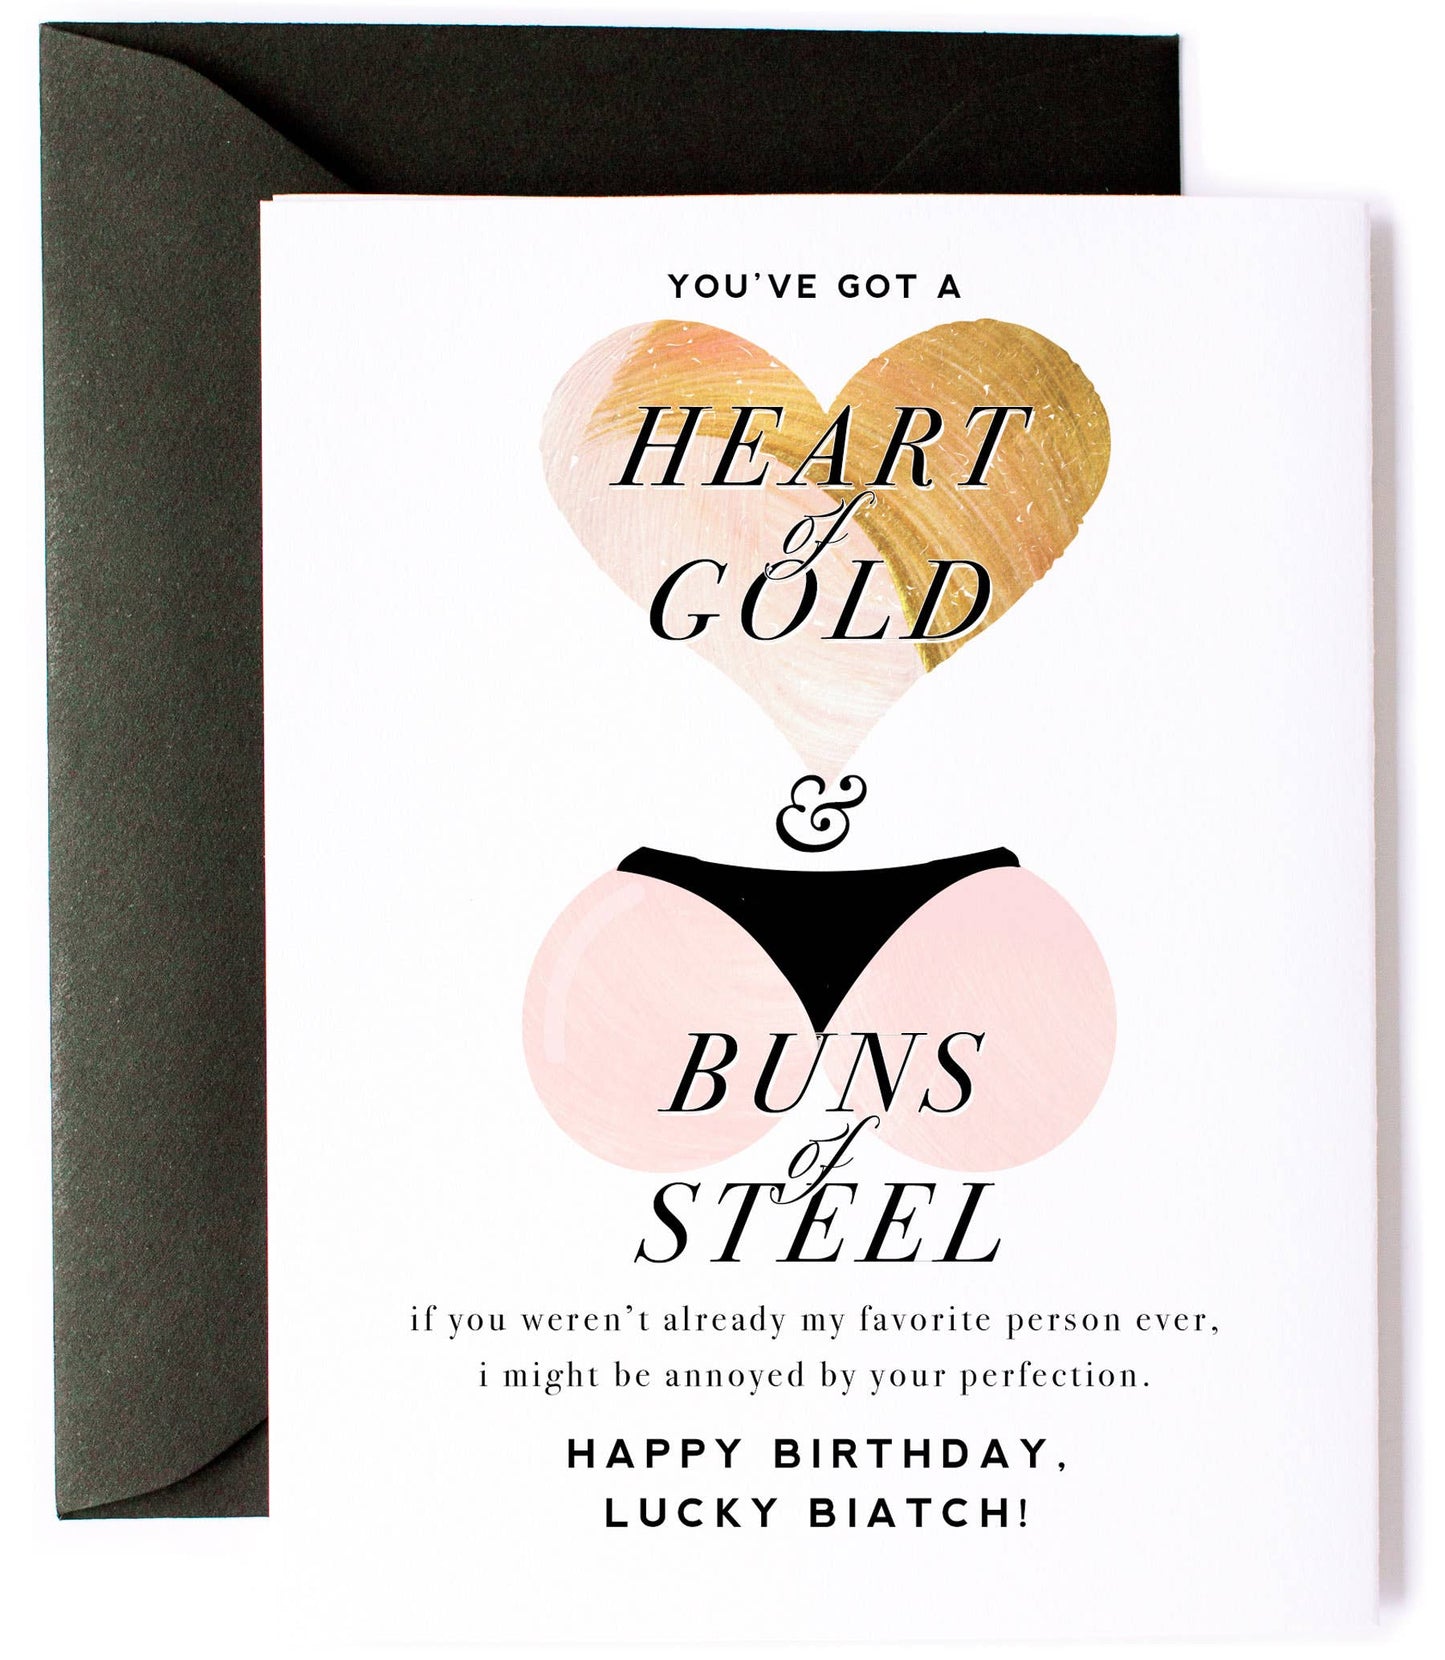 Kitty Meow Boutique - "Heart of Gold & Buns of Steel" - Funny, Birthday Card